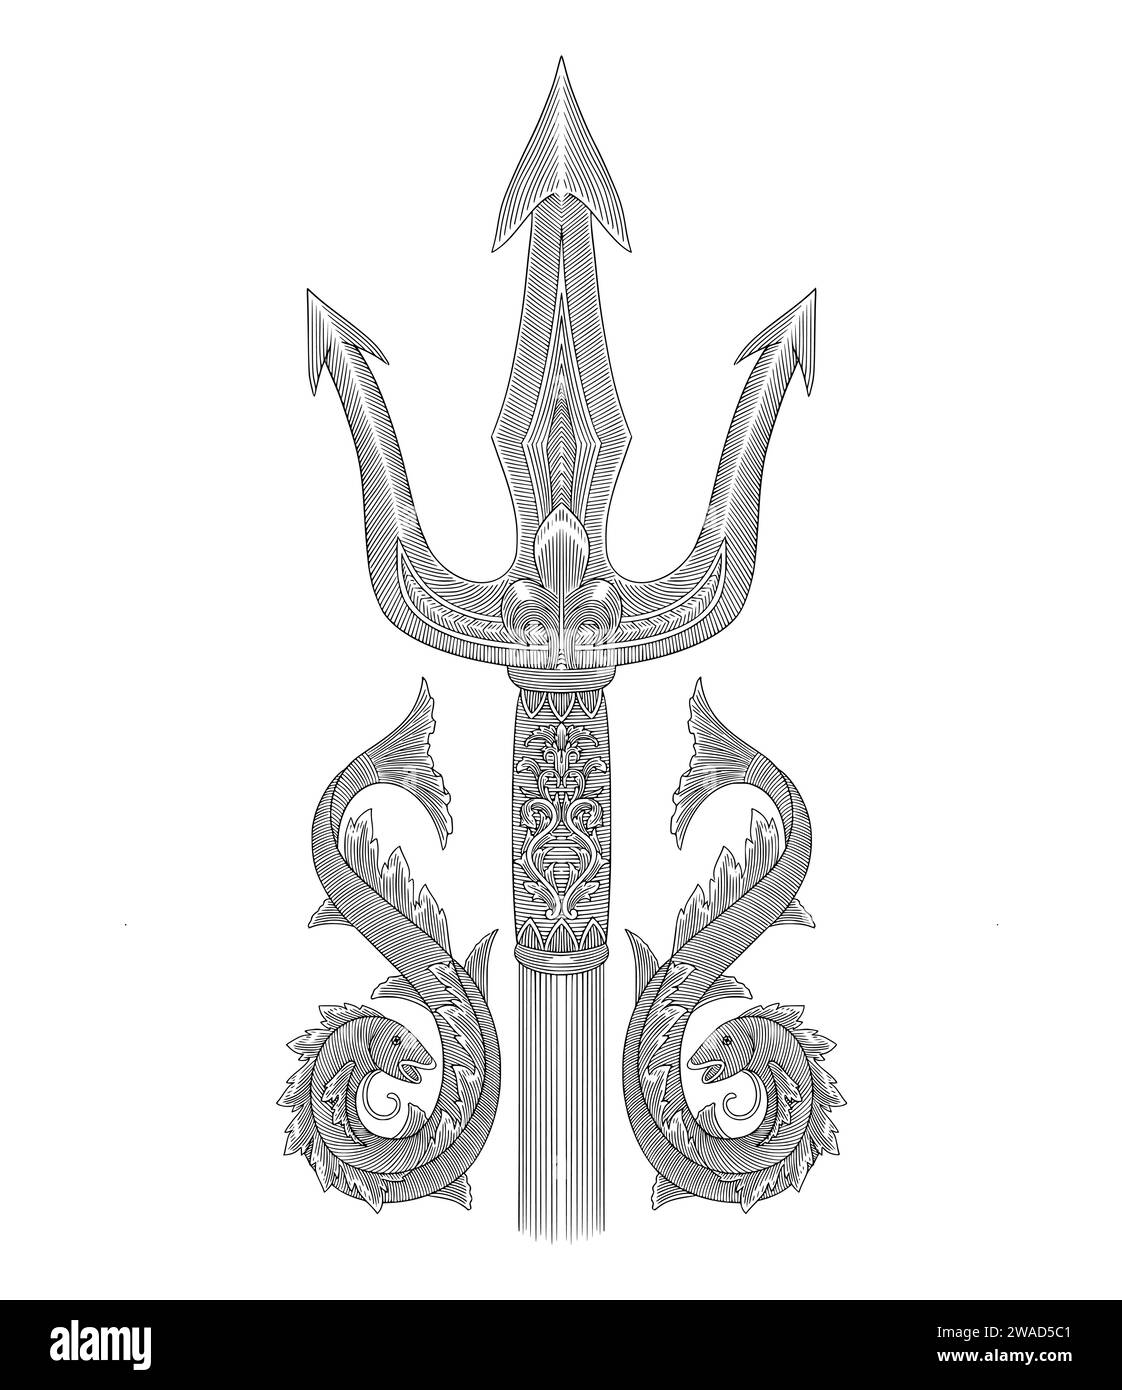 Trident poseidon with fish and floral ornament decoration, vintage engraving illustration Stock Vector